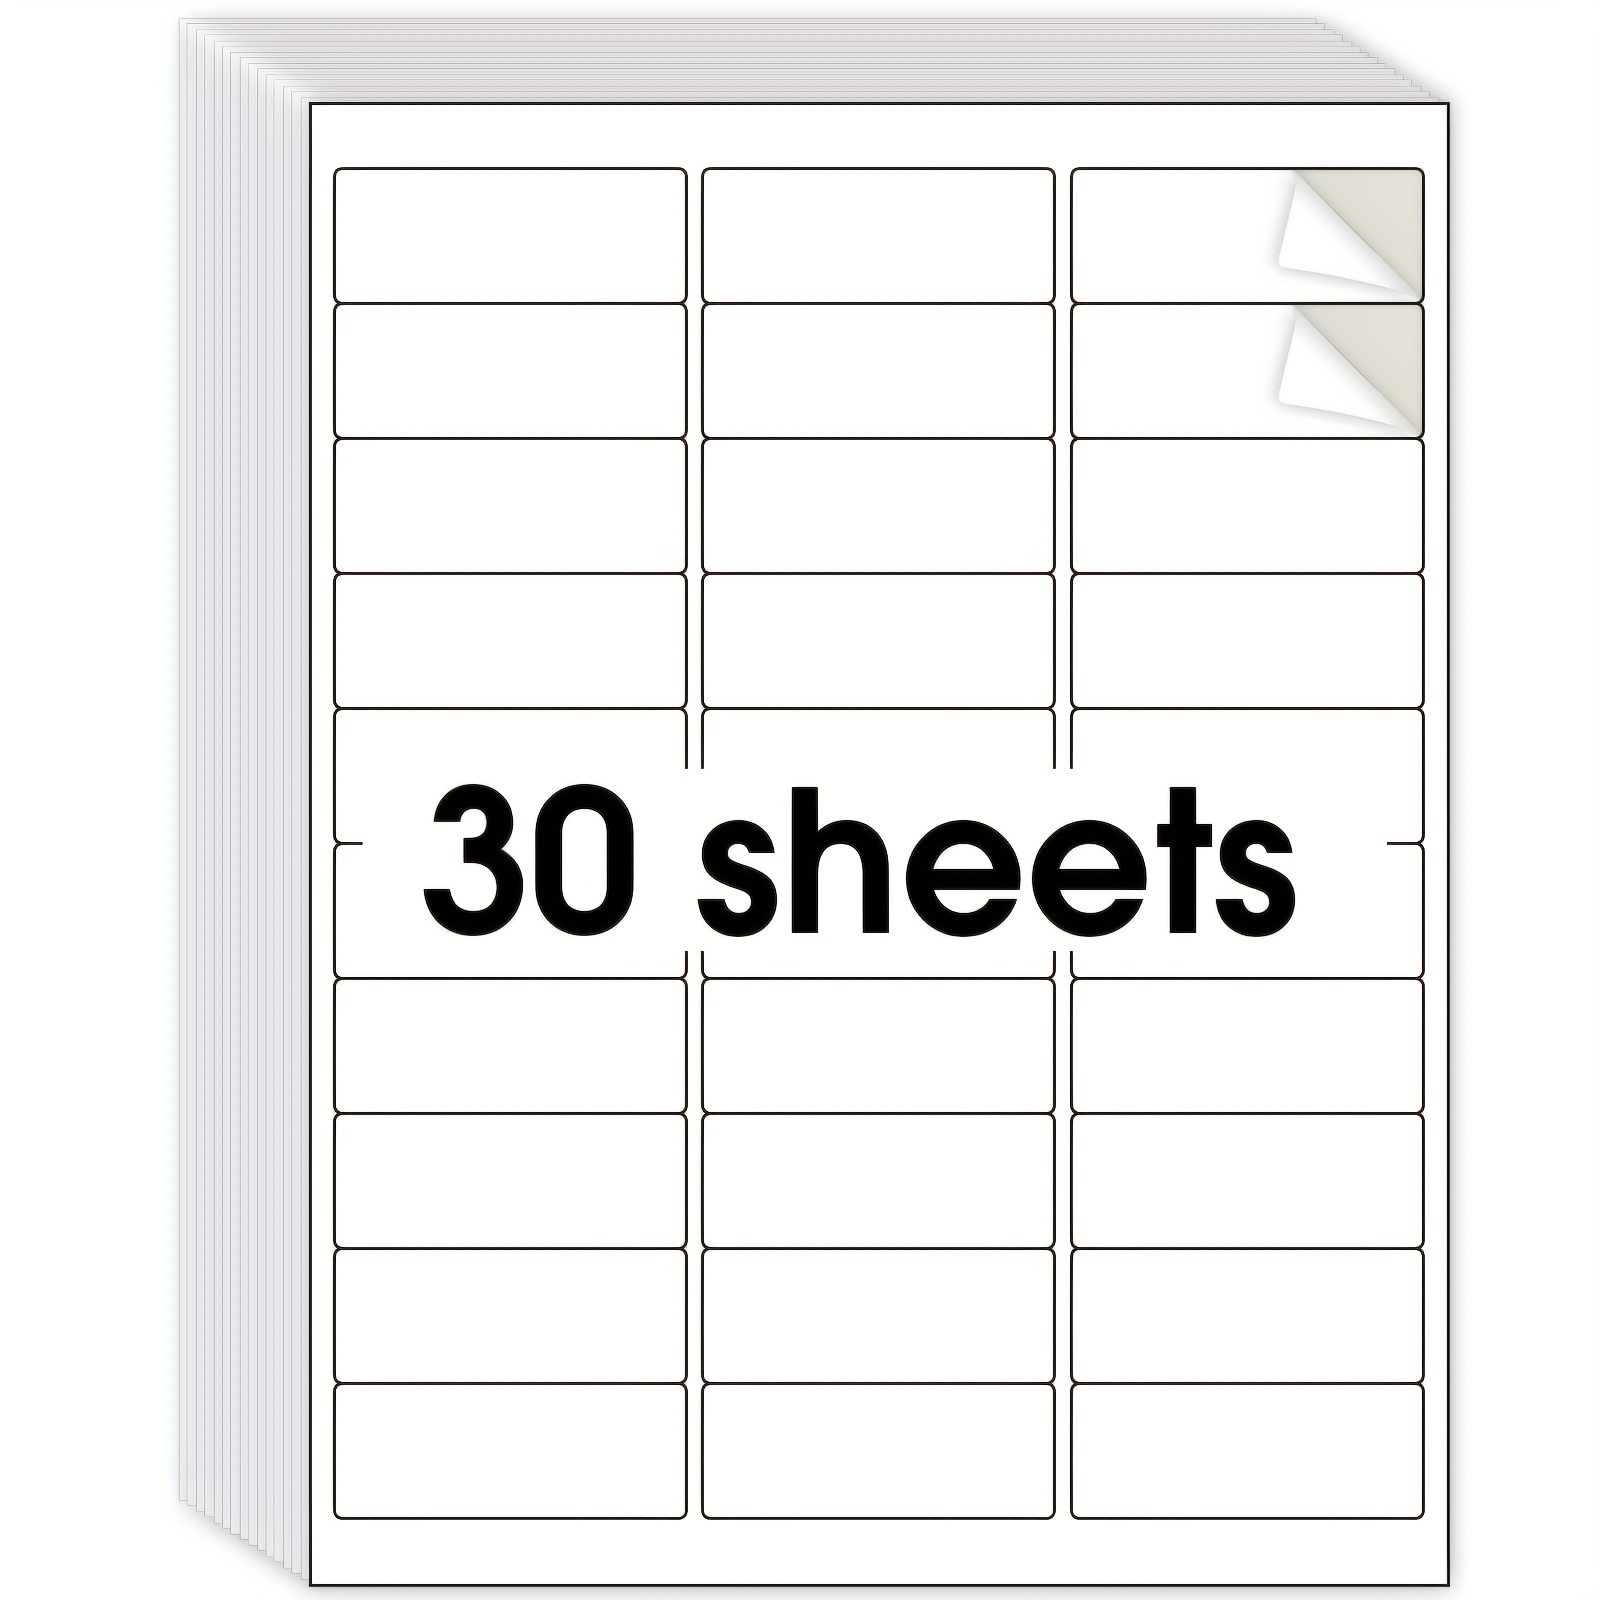 E-Printing Pack of 100 Sheets-High Sticky Printable Matte Self Adhesive Full Sheet A4 Sticker Paper/Label for Inkjet & Laser Printers